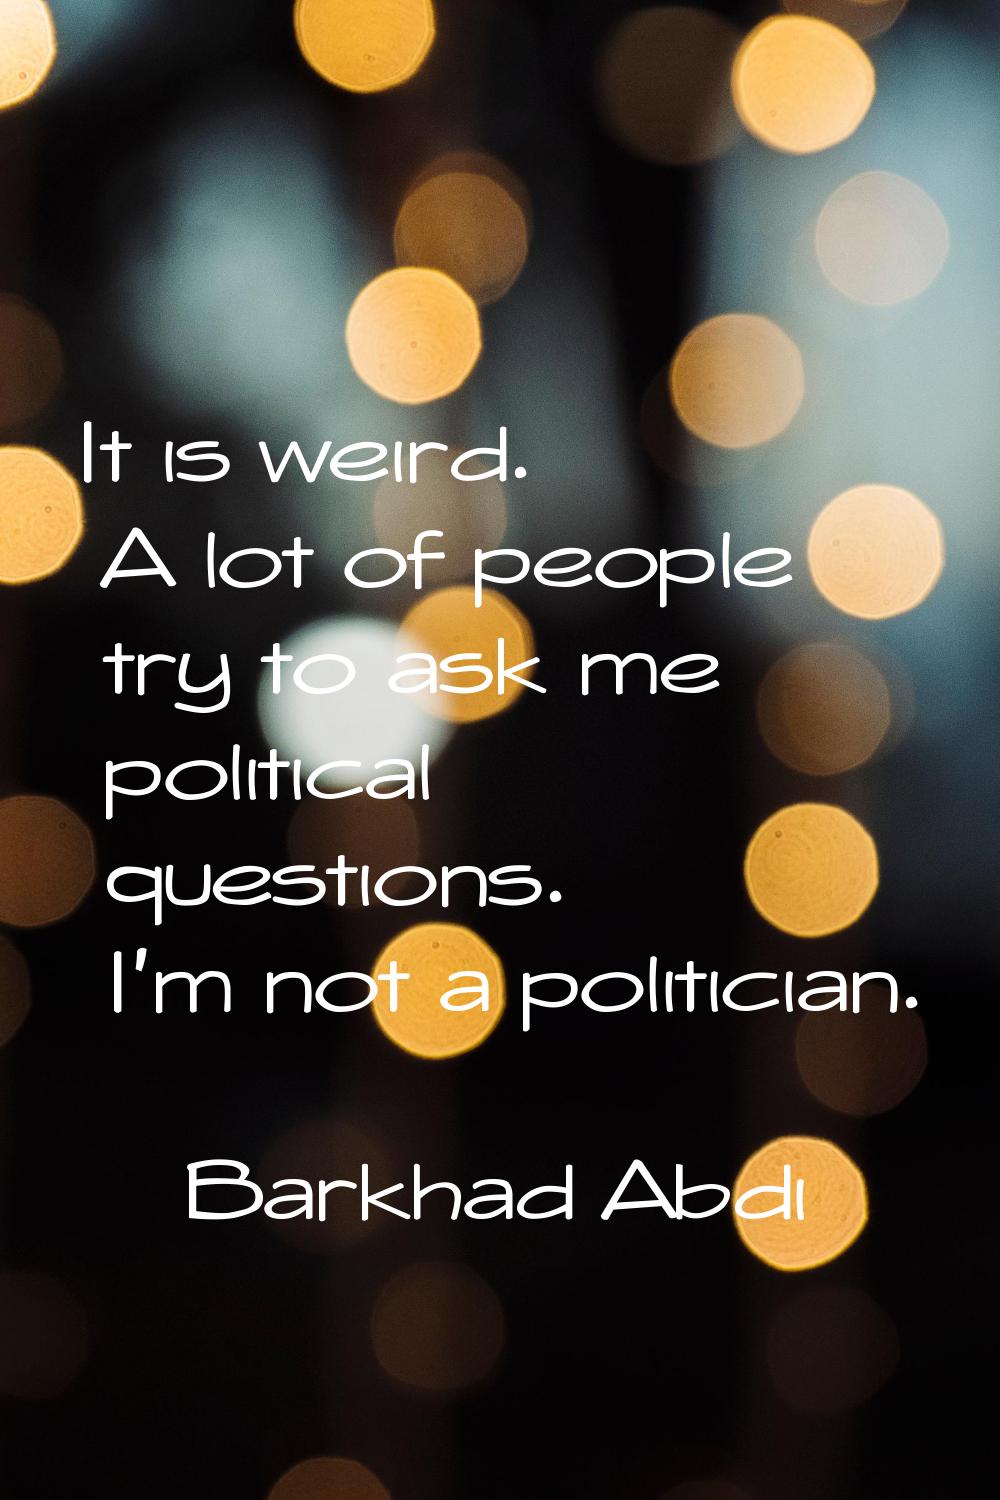 It is weird. A lot of people try to ask me political questions. I'm not a politician.